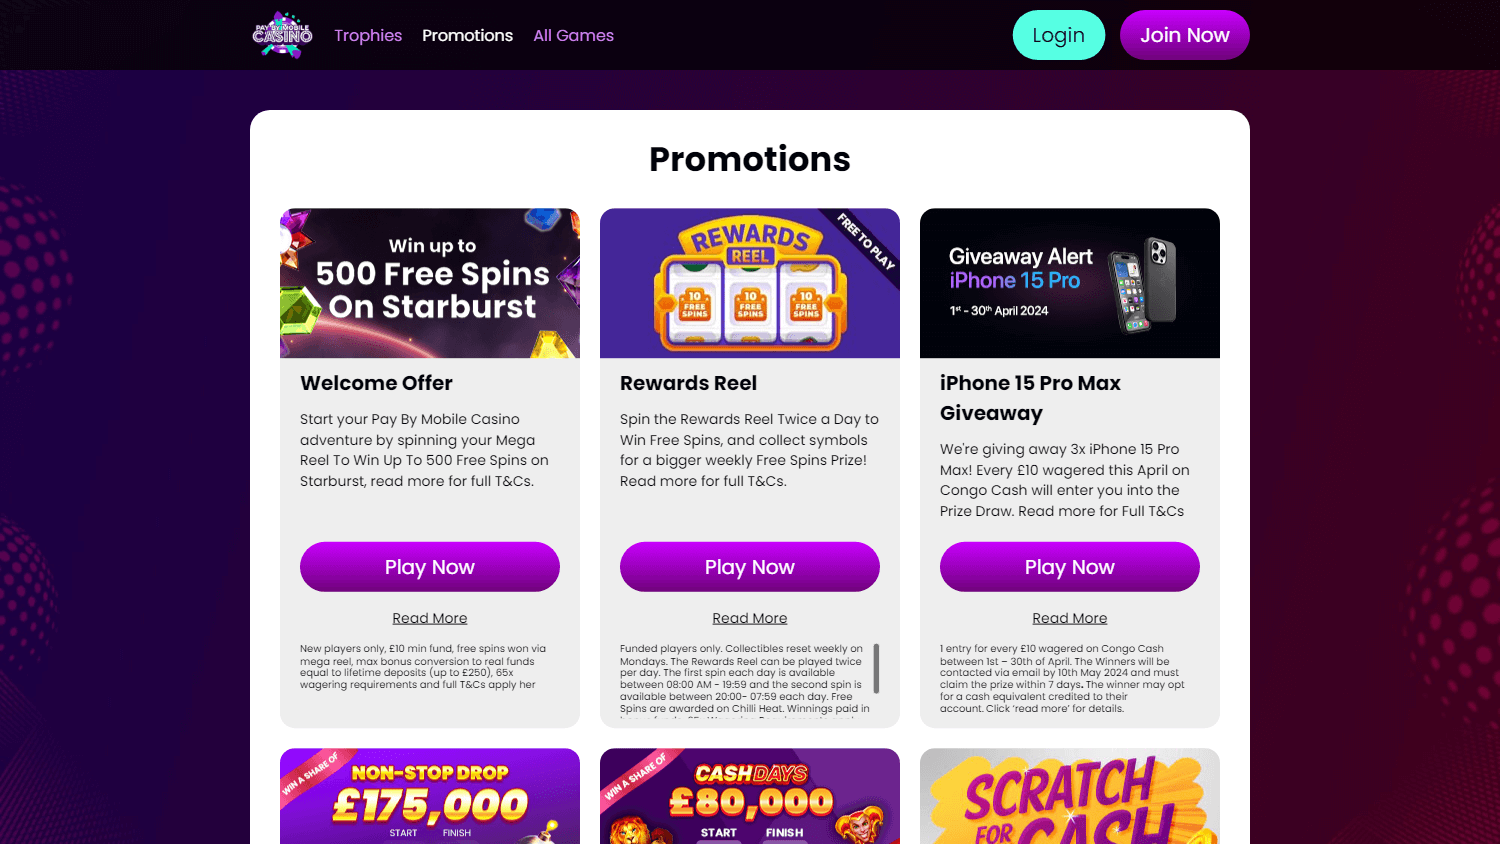 pay_by_mobile_casino_promotions_desktop